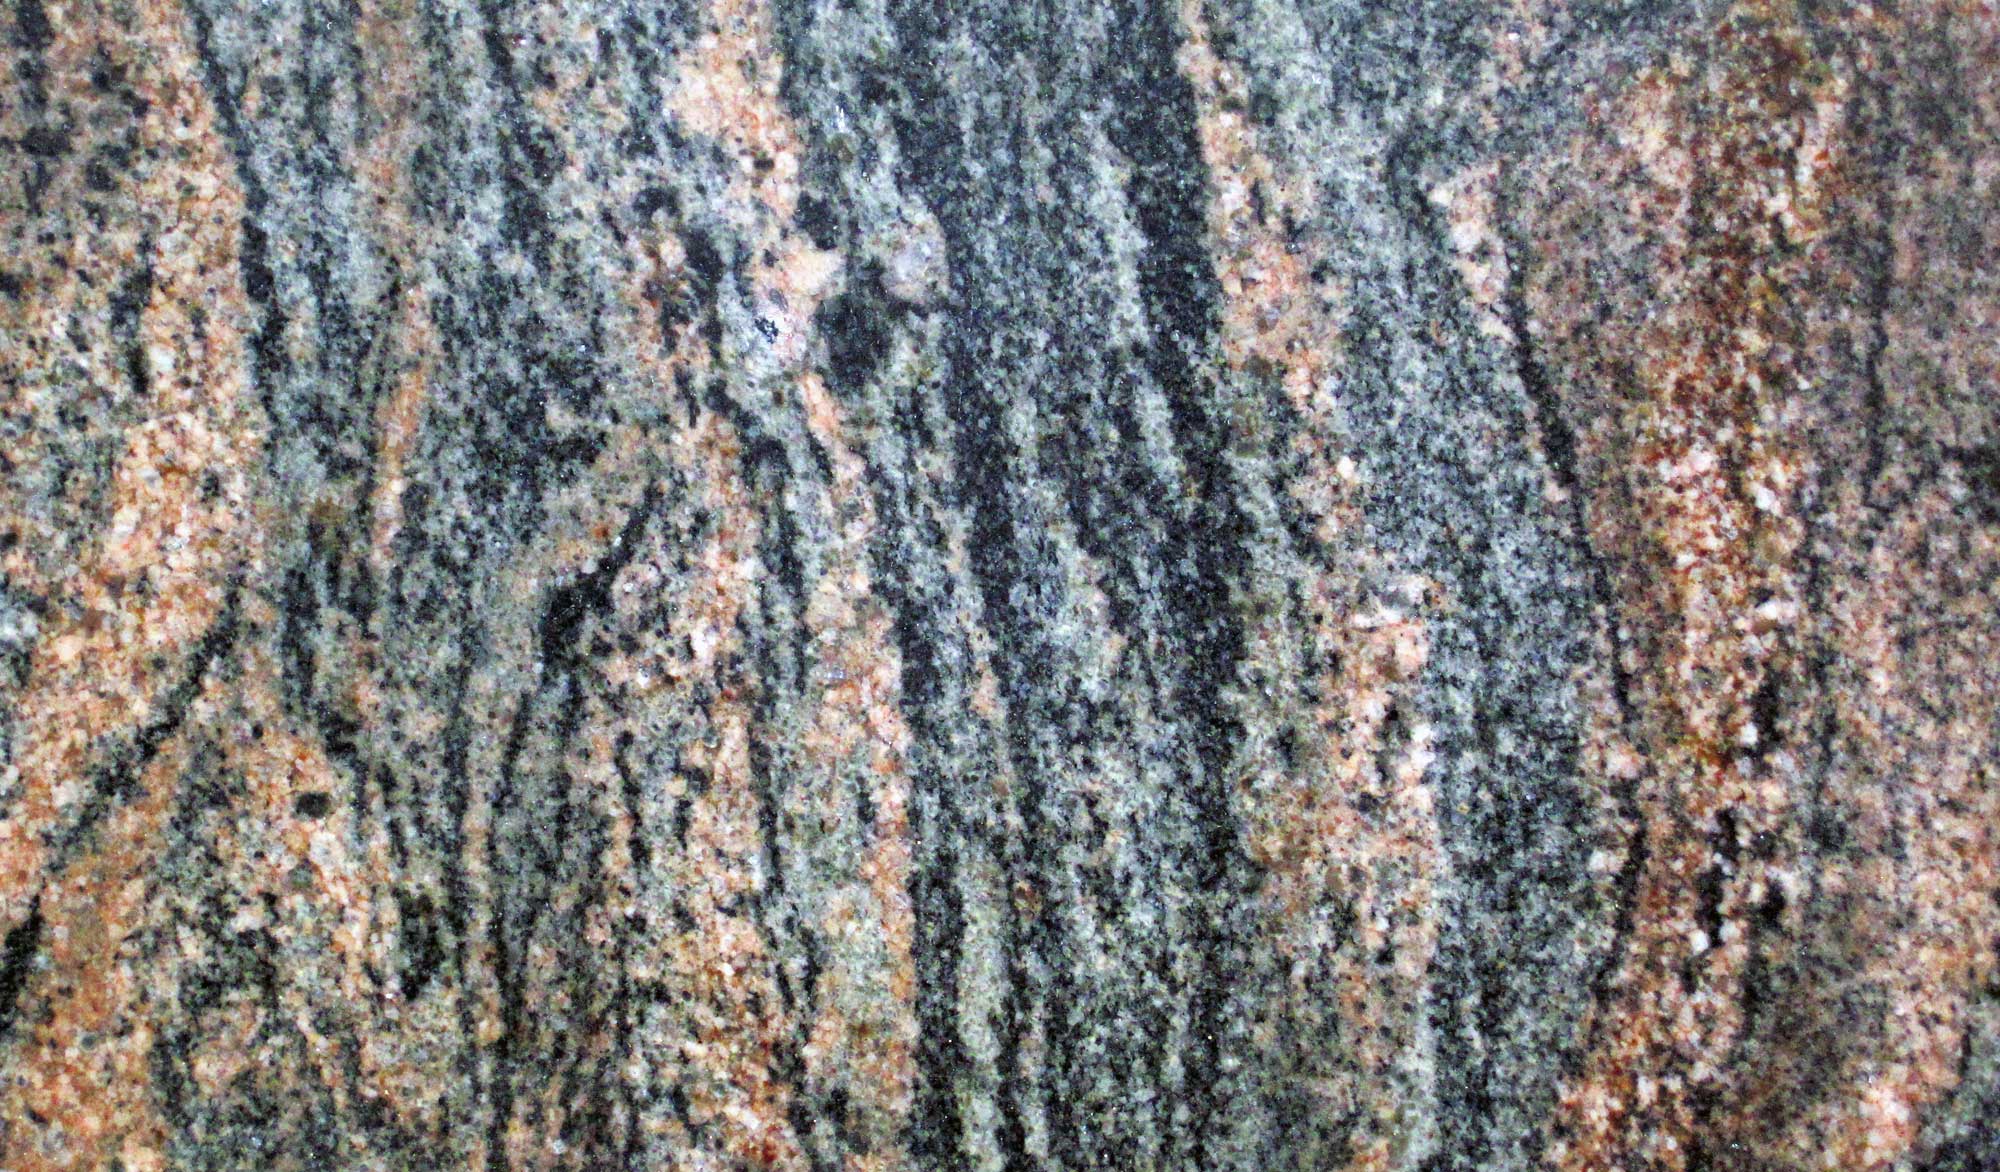 Close-up photograph of Archean Morton Gneiss from Morton, Minnesota. The photo shows a rock with irregular vertical bands of alternating pink and gray rock.